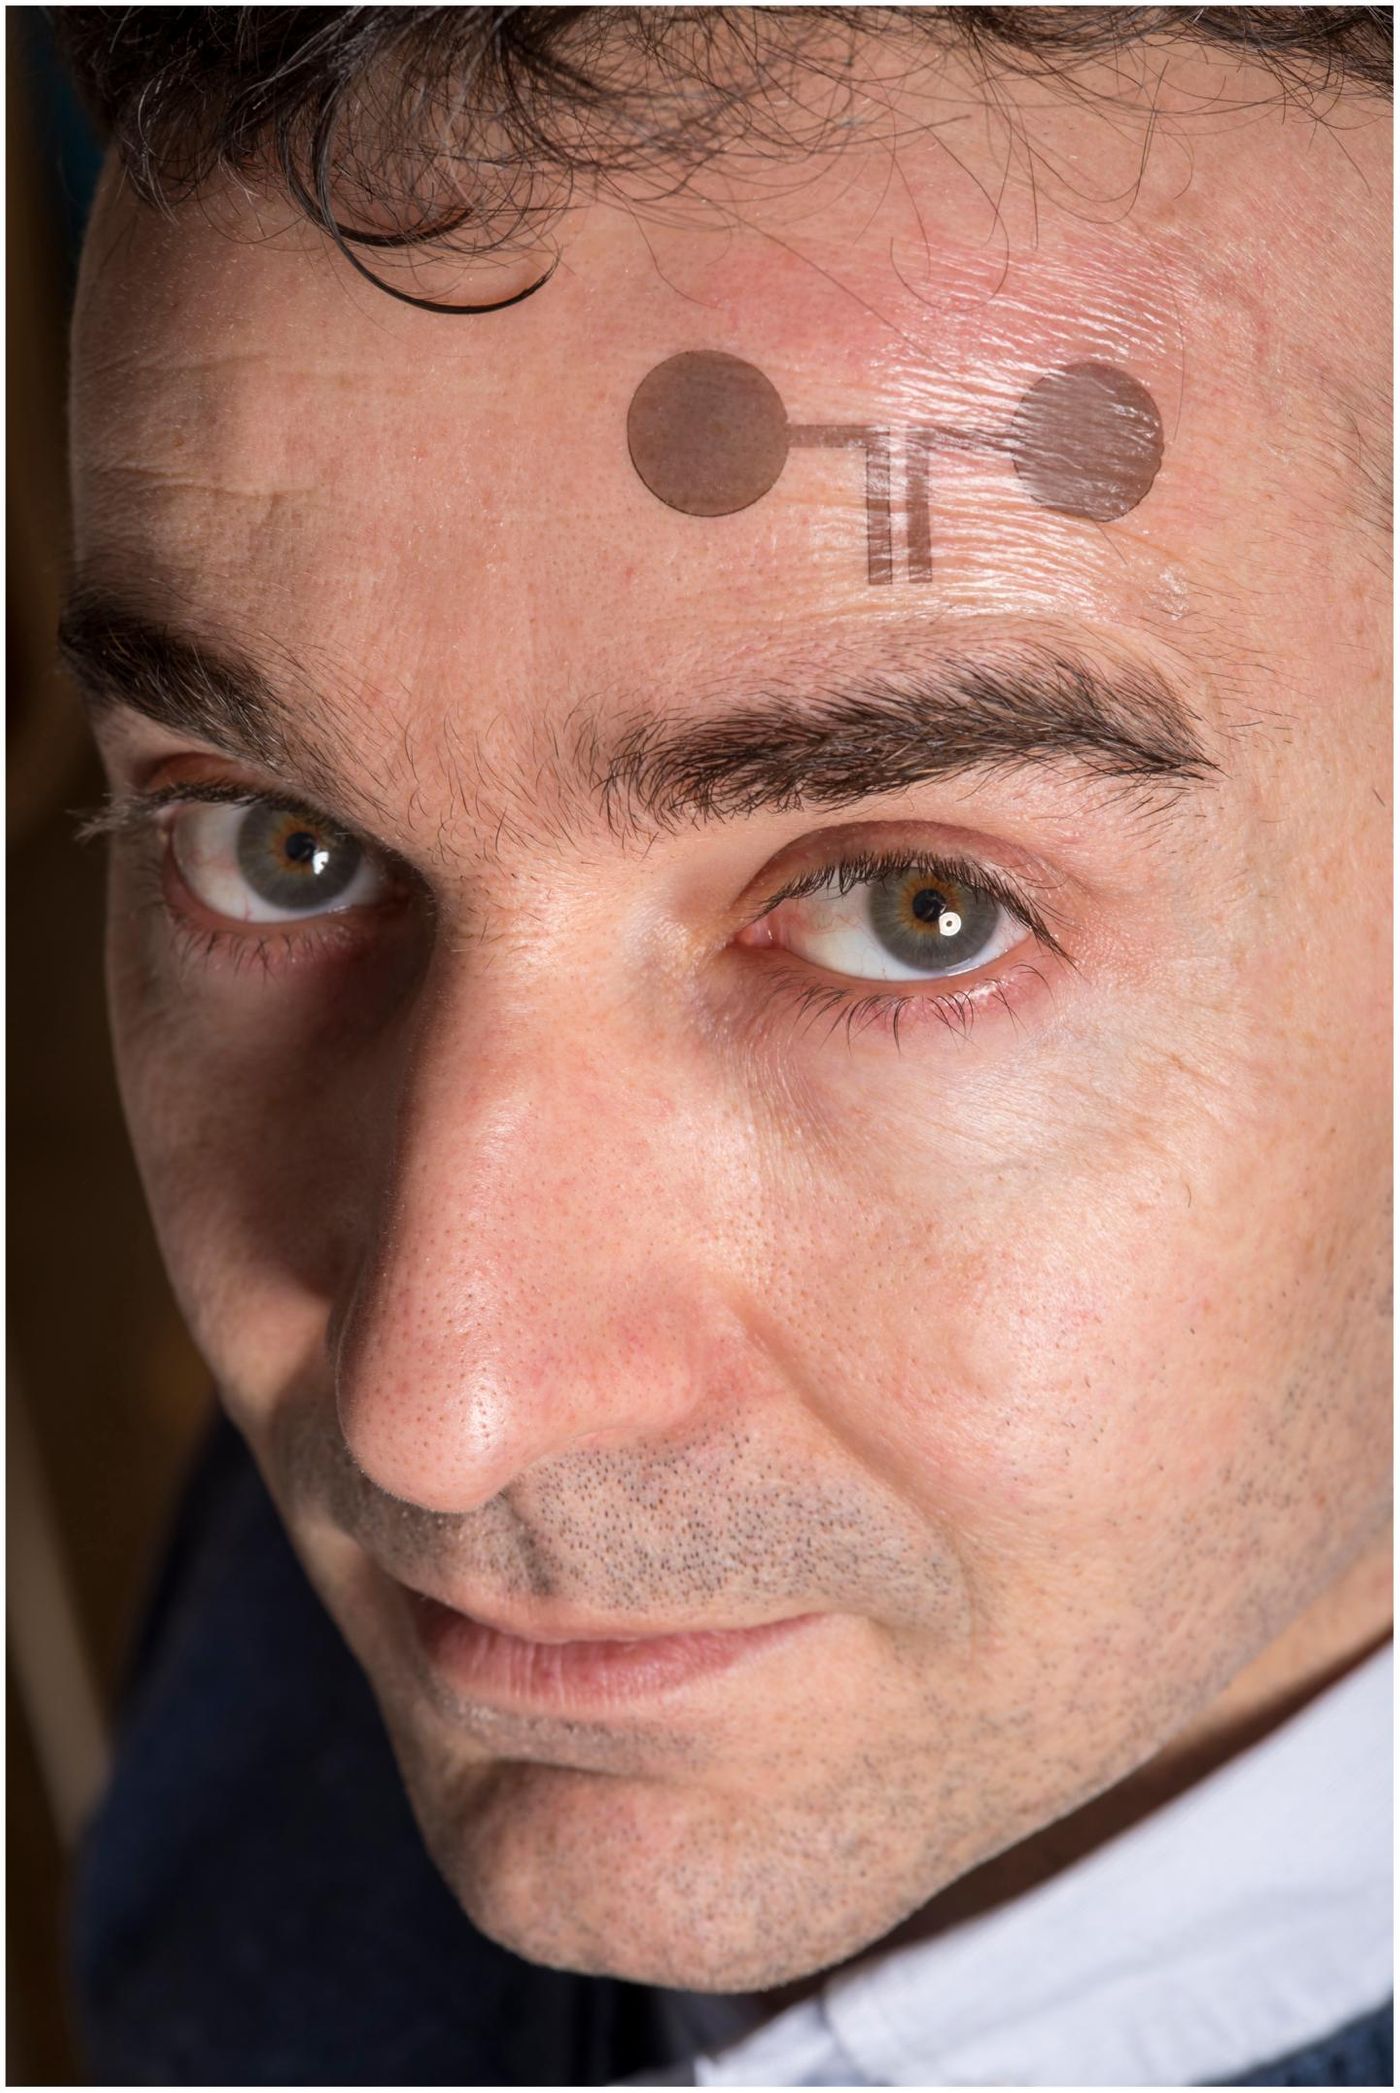 Francesco Greco with a temporary tattoo electrode. Credit: Lunghammer - TU Graz